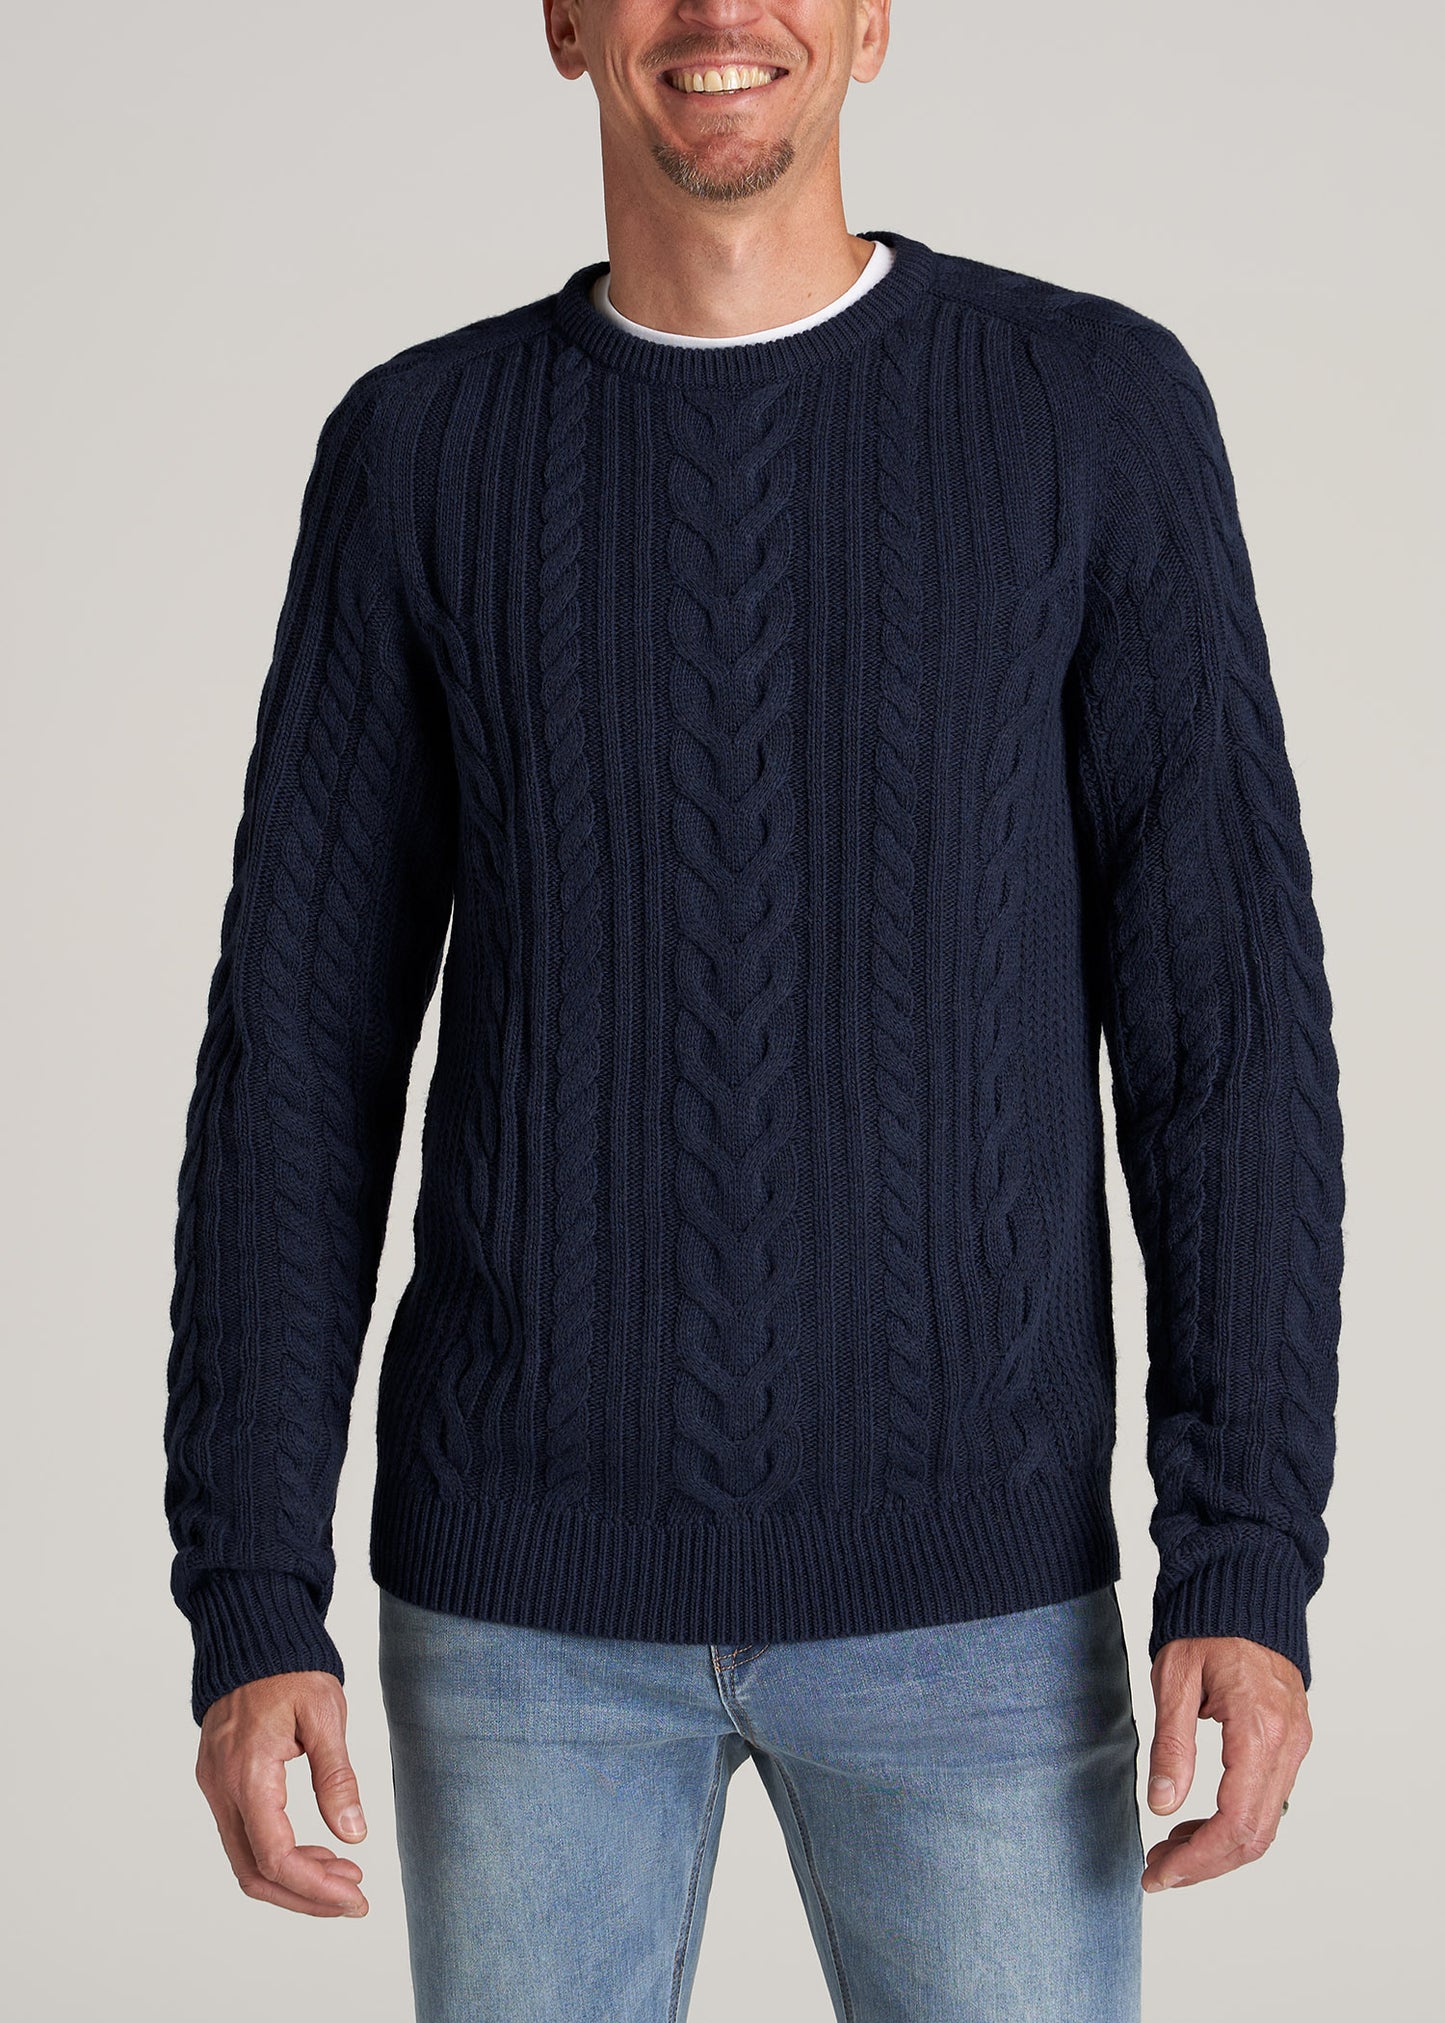 Heavy Cable Knit Tall Men's Sweater in Navy